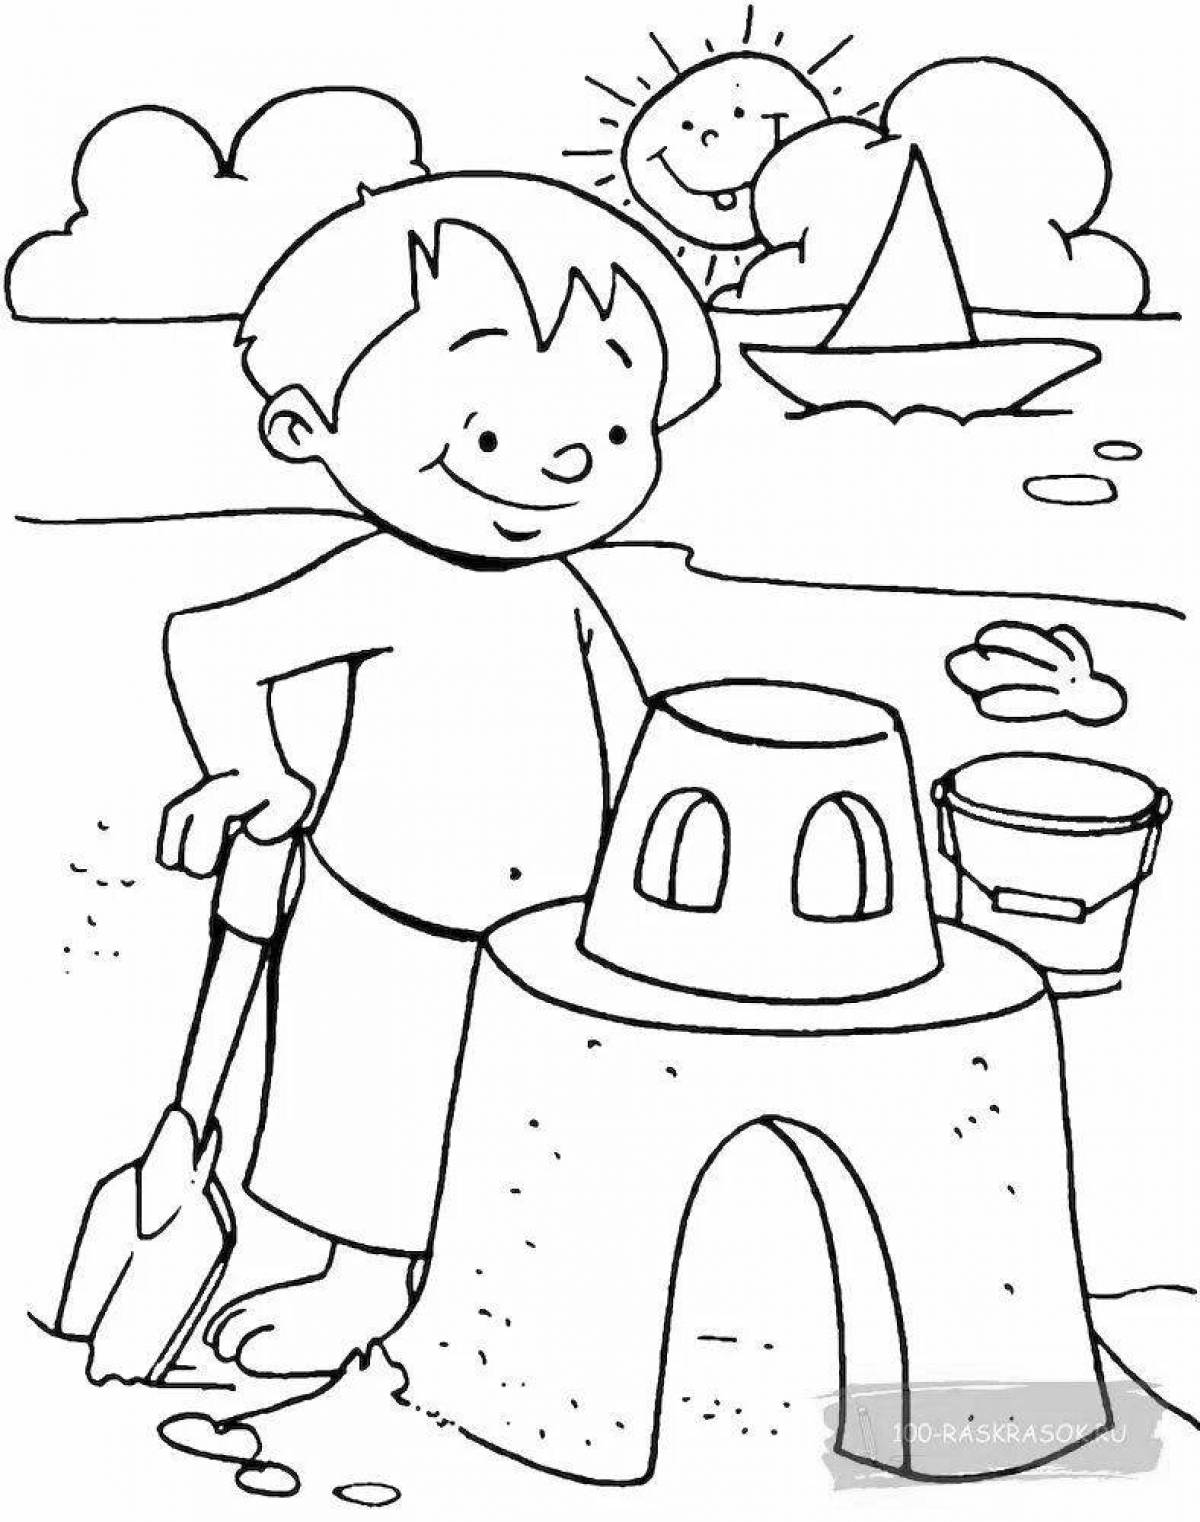 Exciting summer coloring book